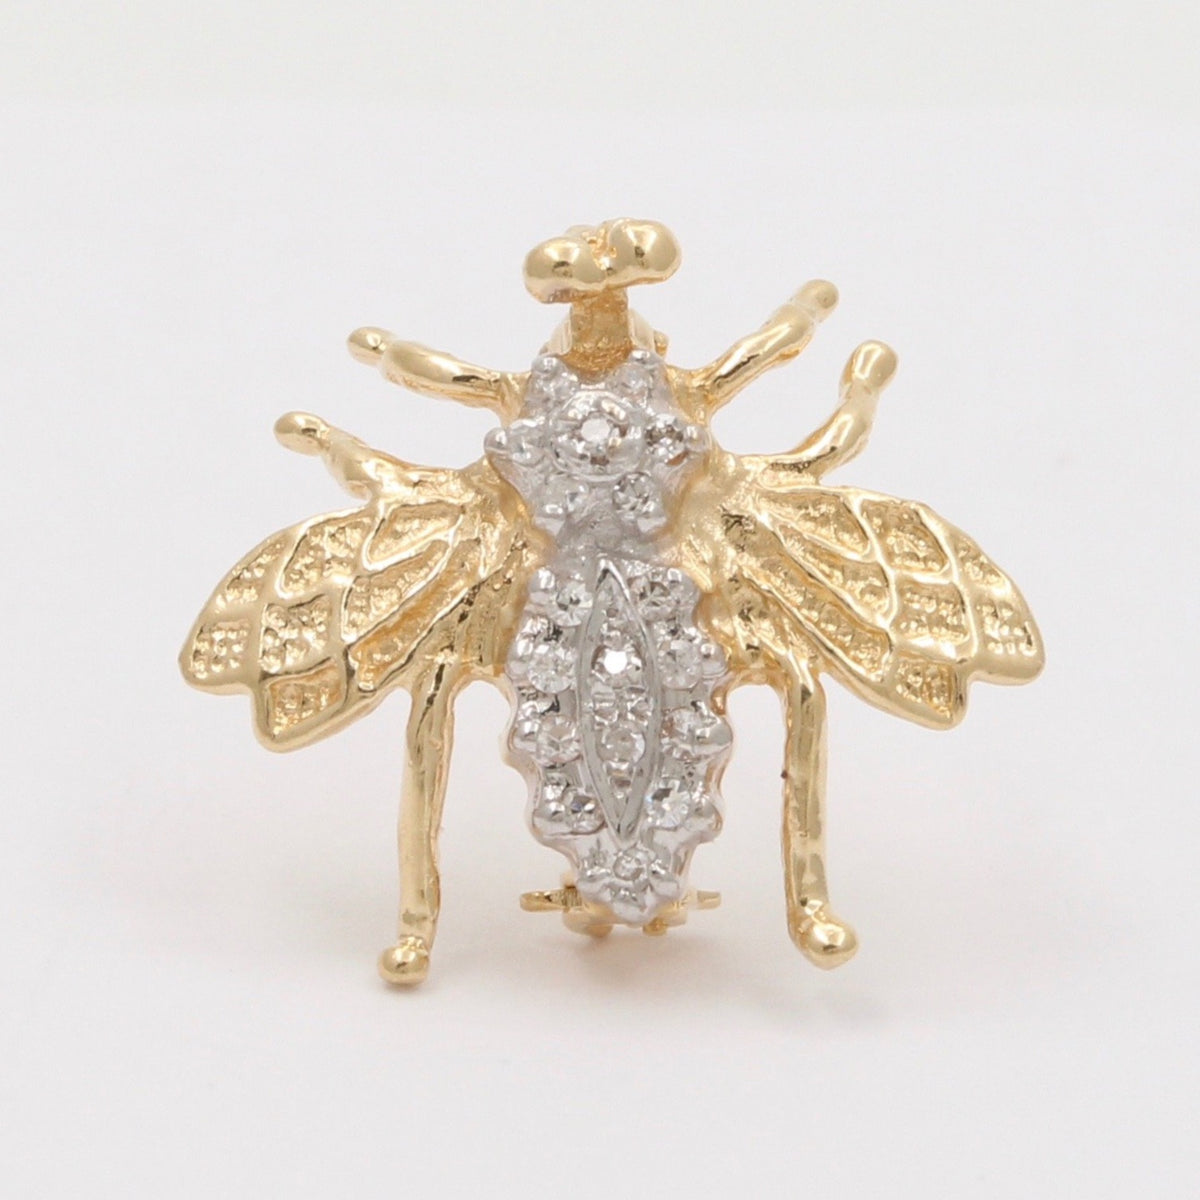 Vintage 14K Gold and Diamond Bee Fly Pin, Insect Brooch